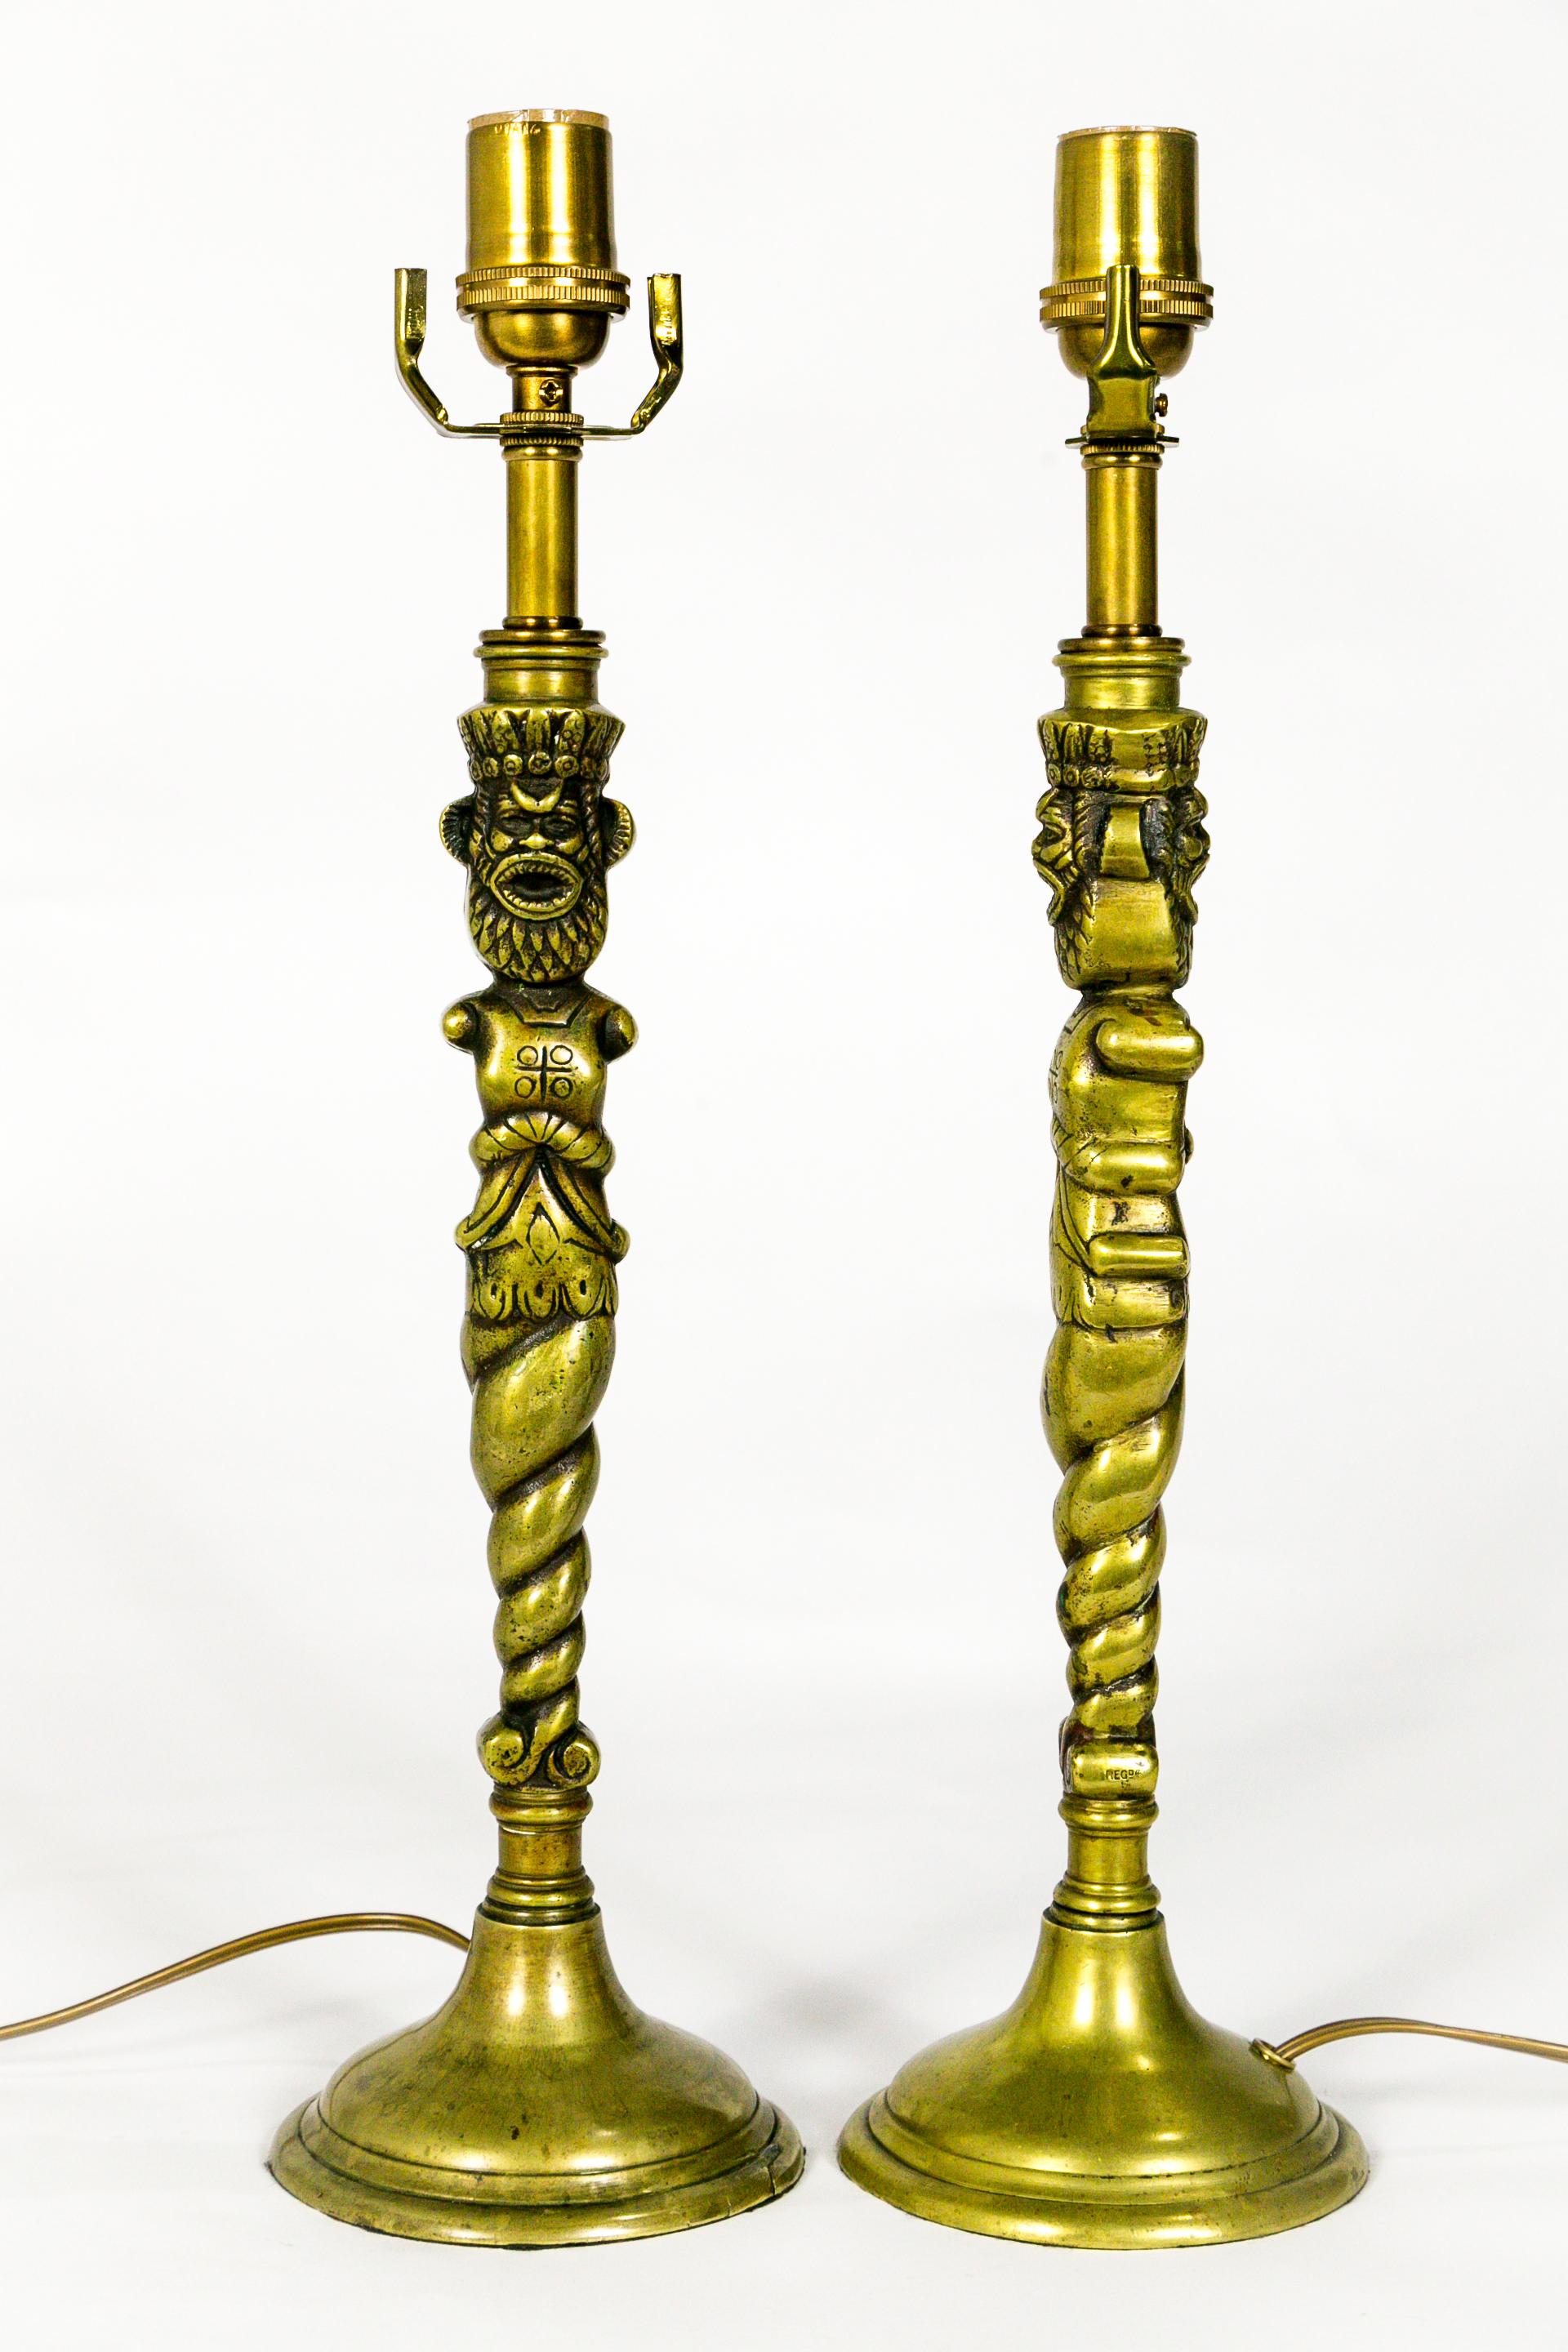 Whimsical, TOTEM style, brass candlestick lamps with bearded, crowned male detail. Handmade, America, 1920s. Measures: 17.5